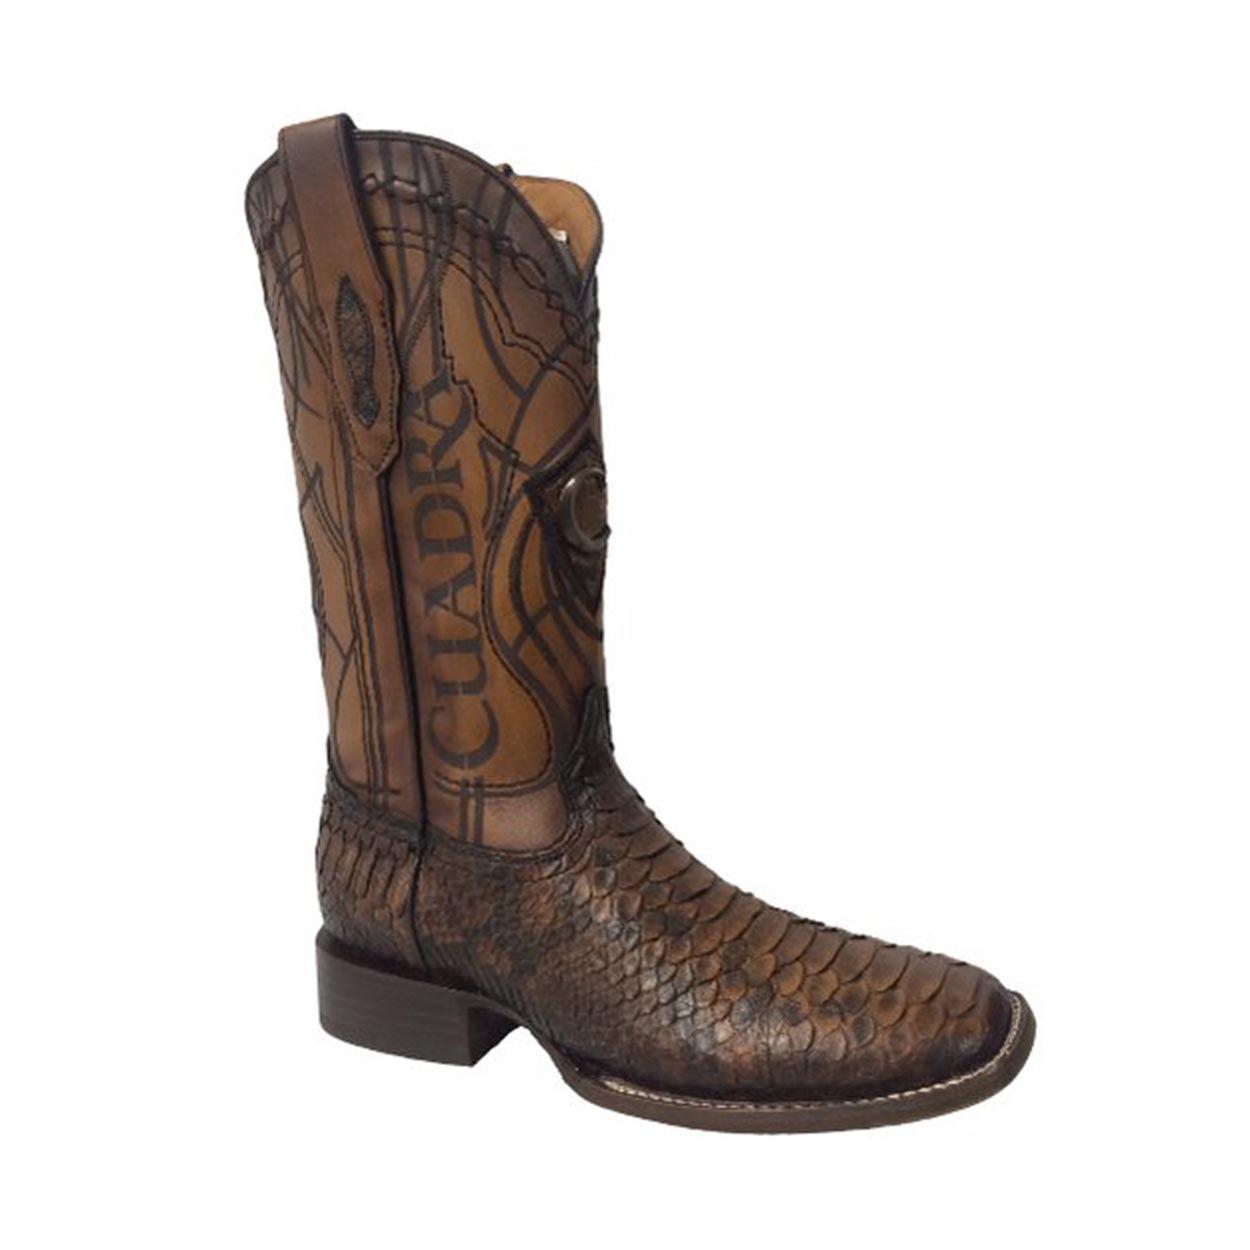 3Z1OPH - Cuadra brown classic cowboy rodeo python leather boots for men-Kuet.us